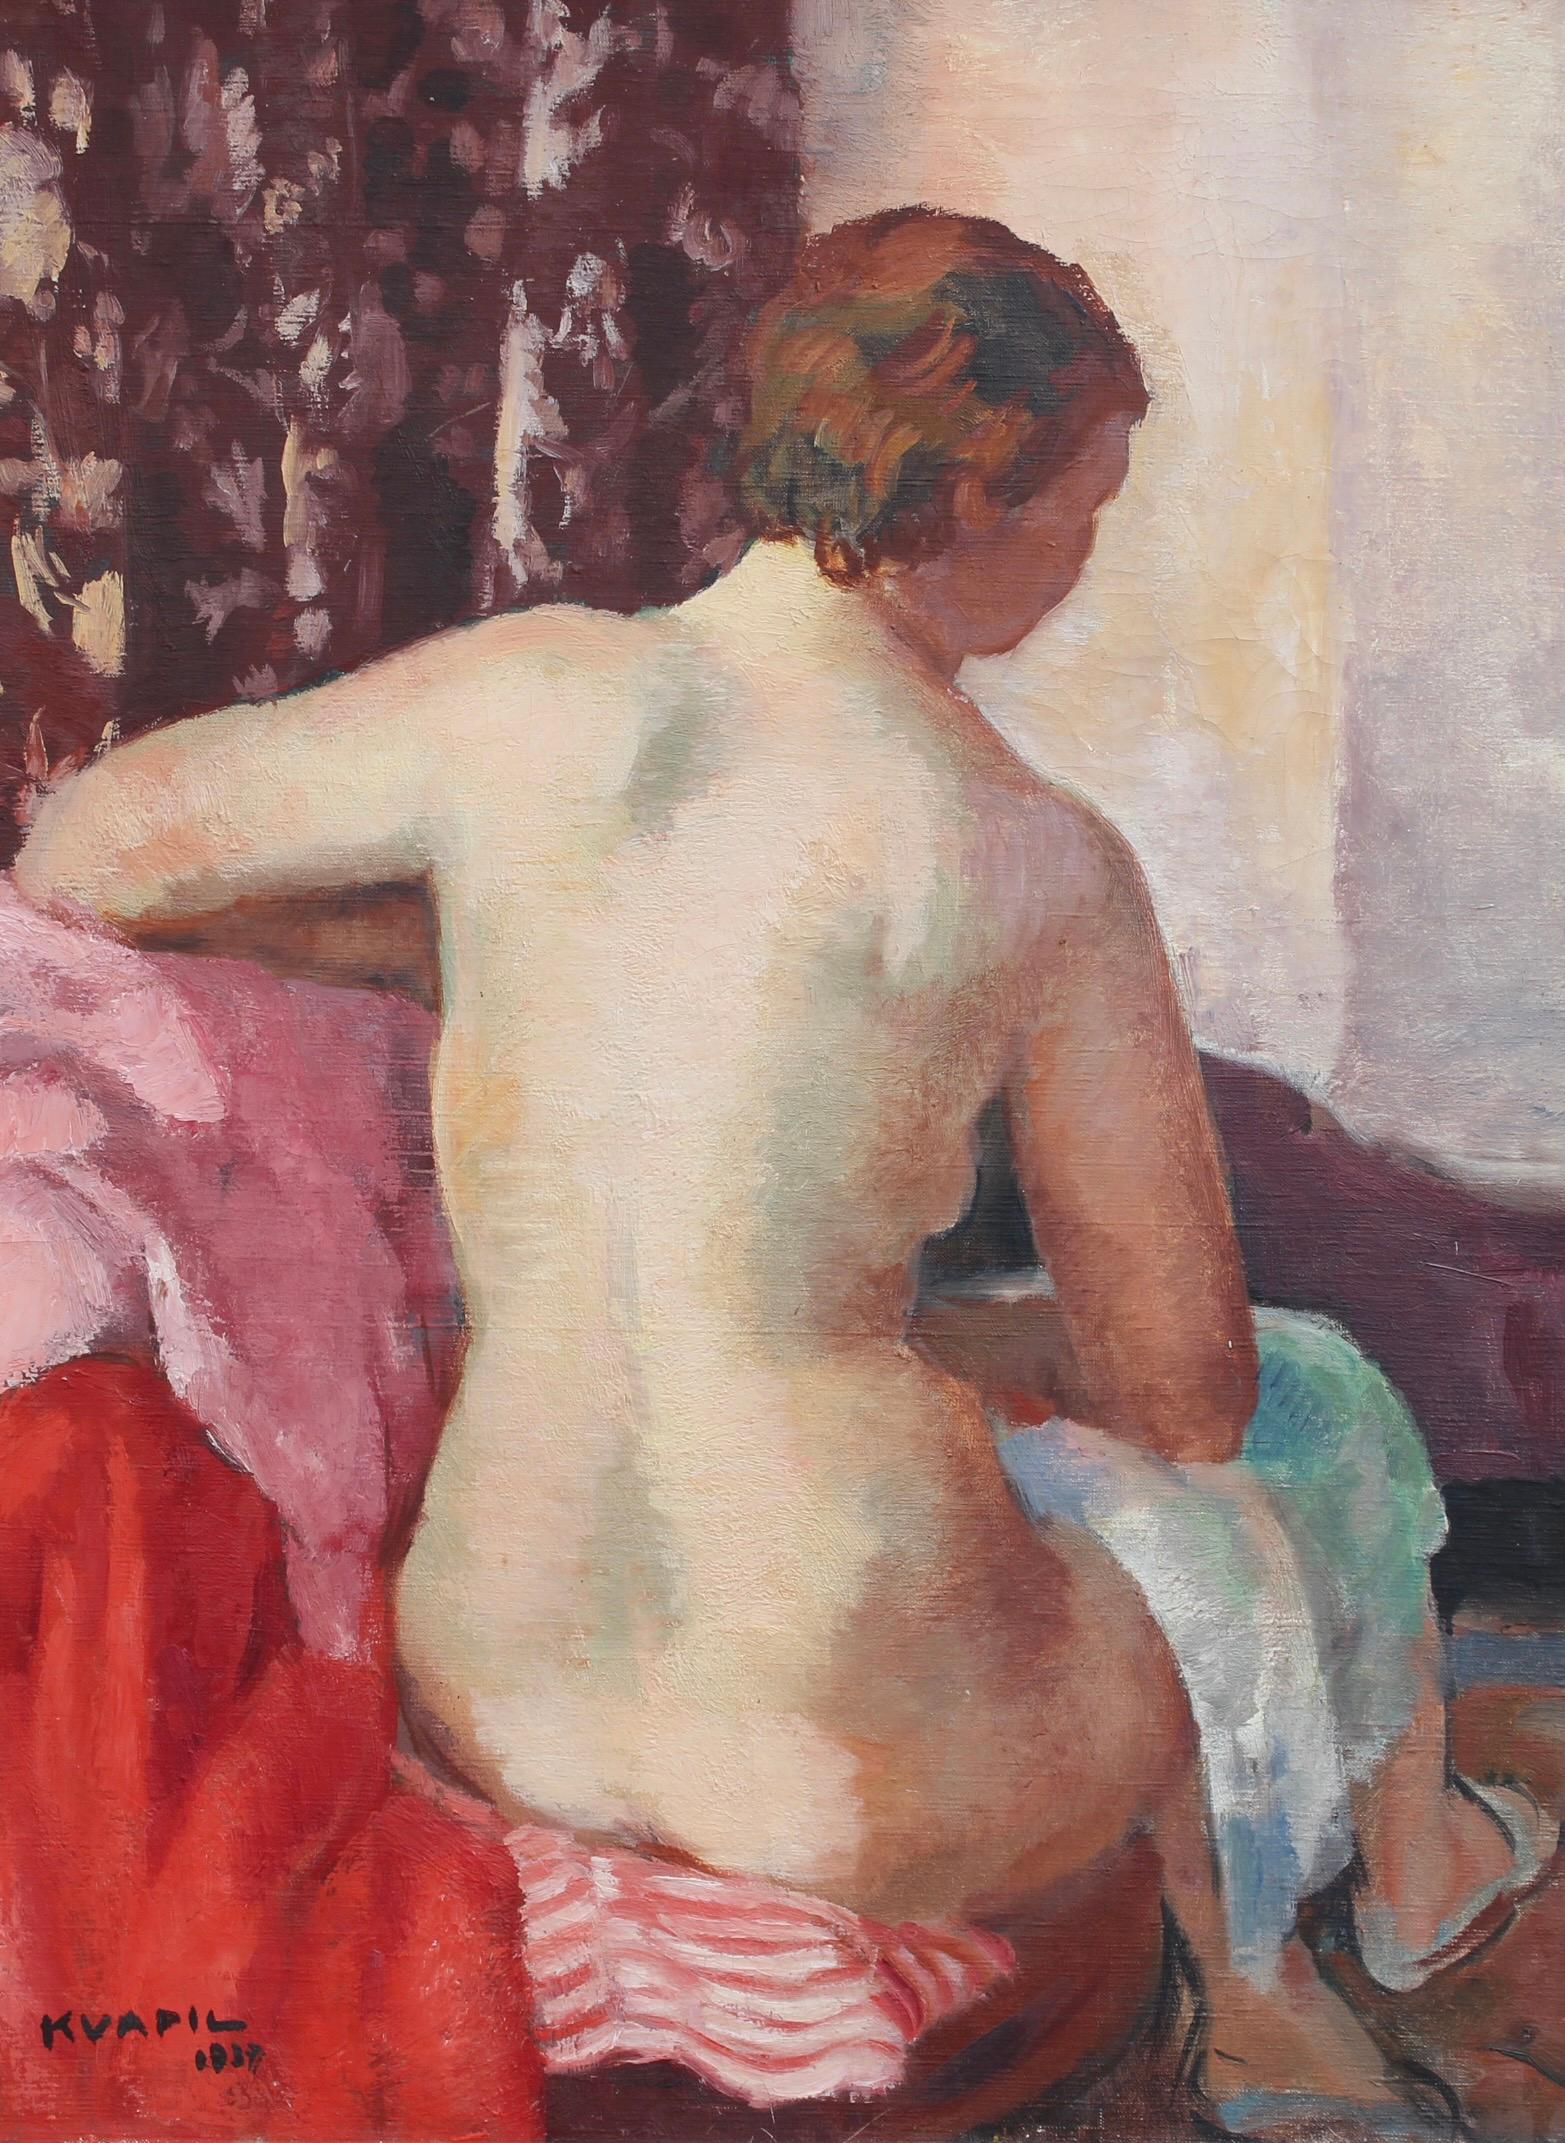 Nude Viewed from the Back - Painting by Charles Kvapil